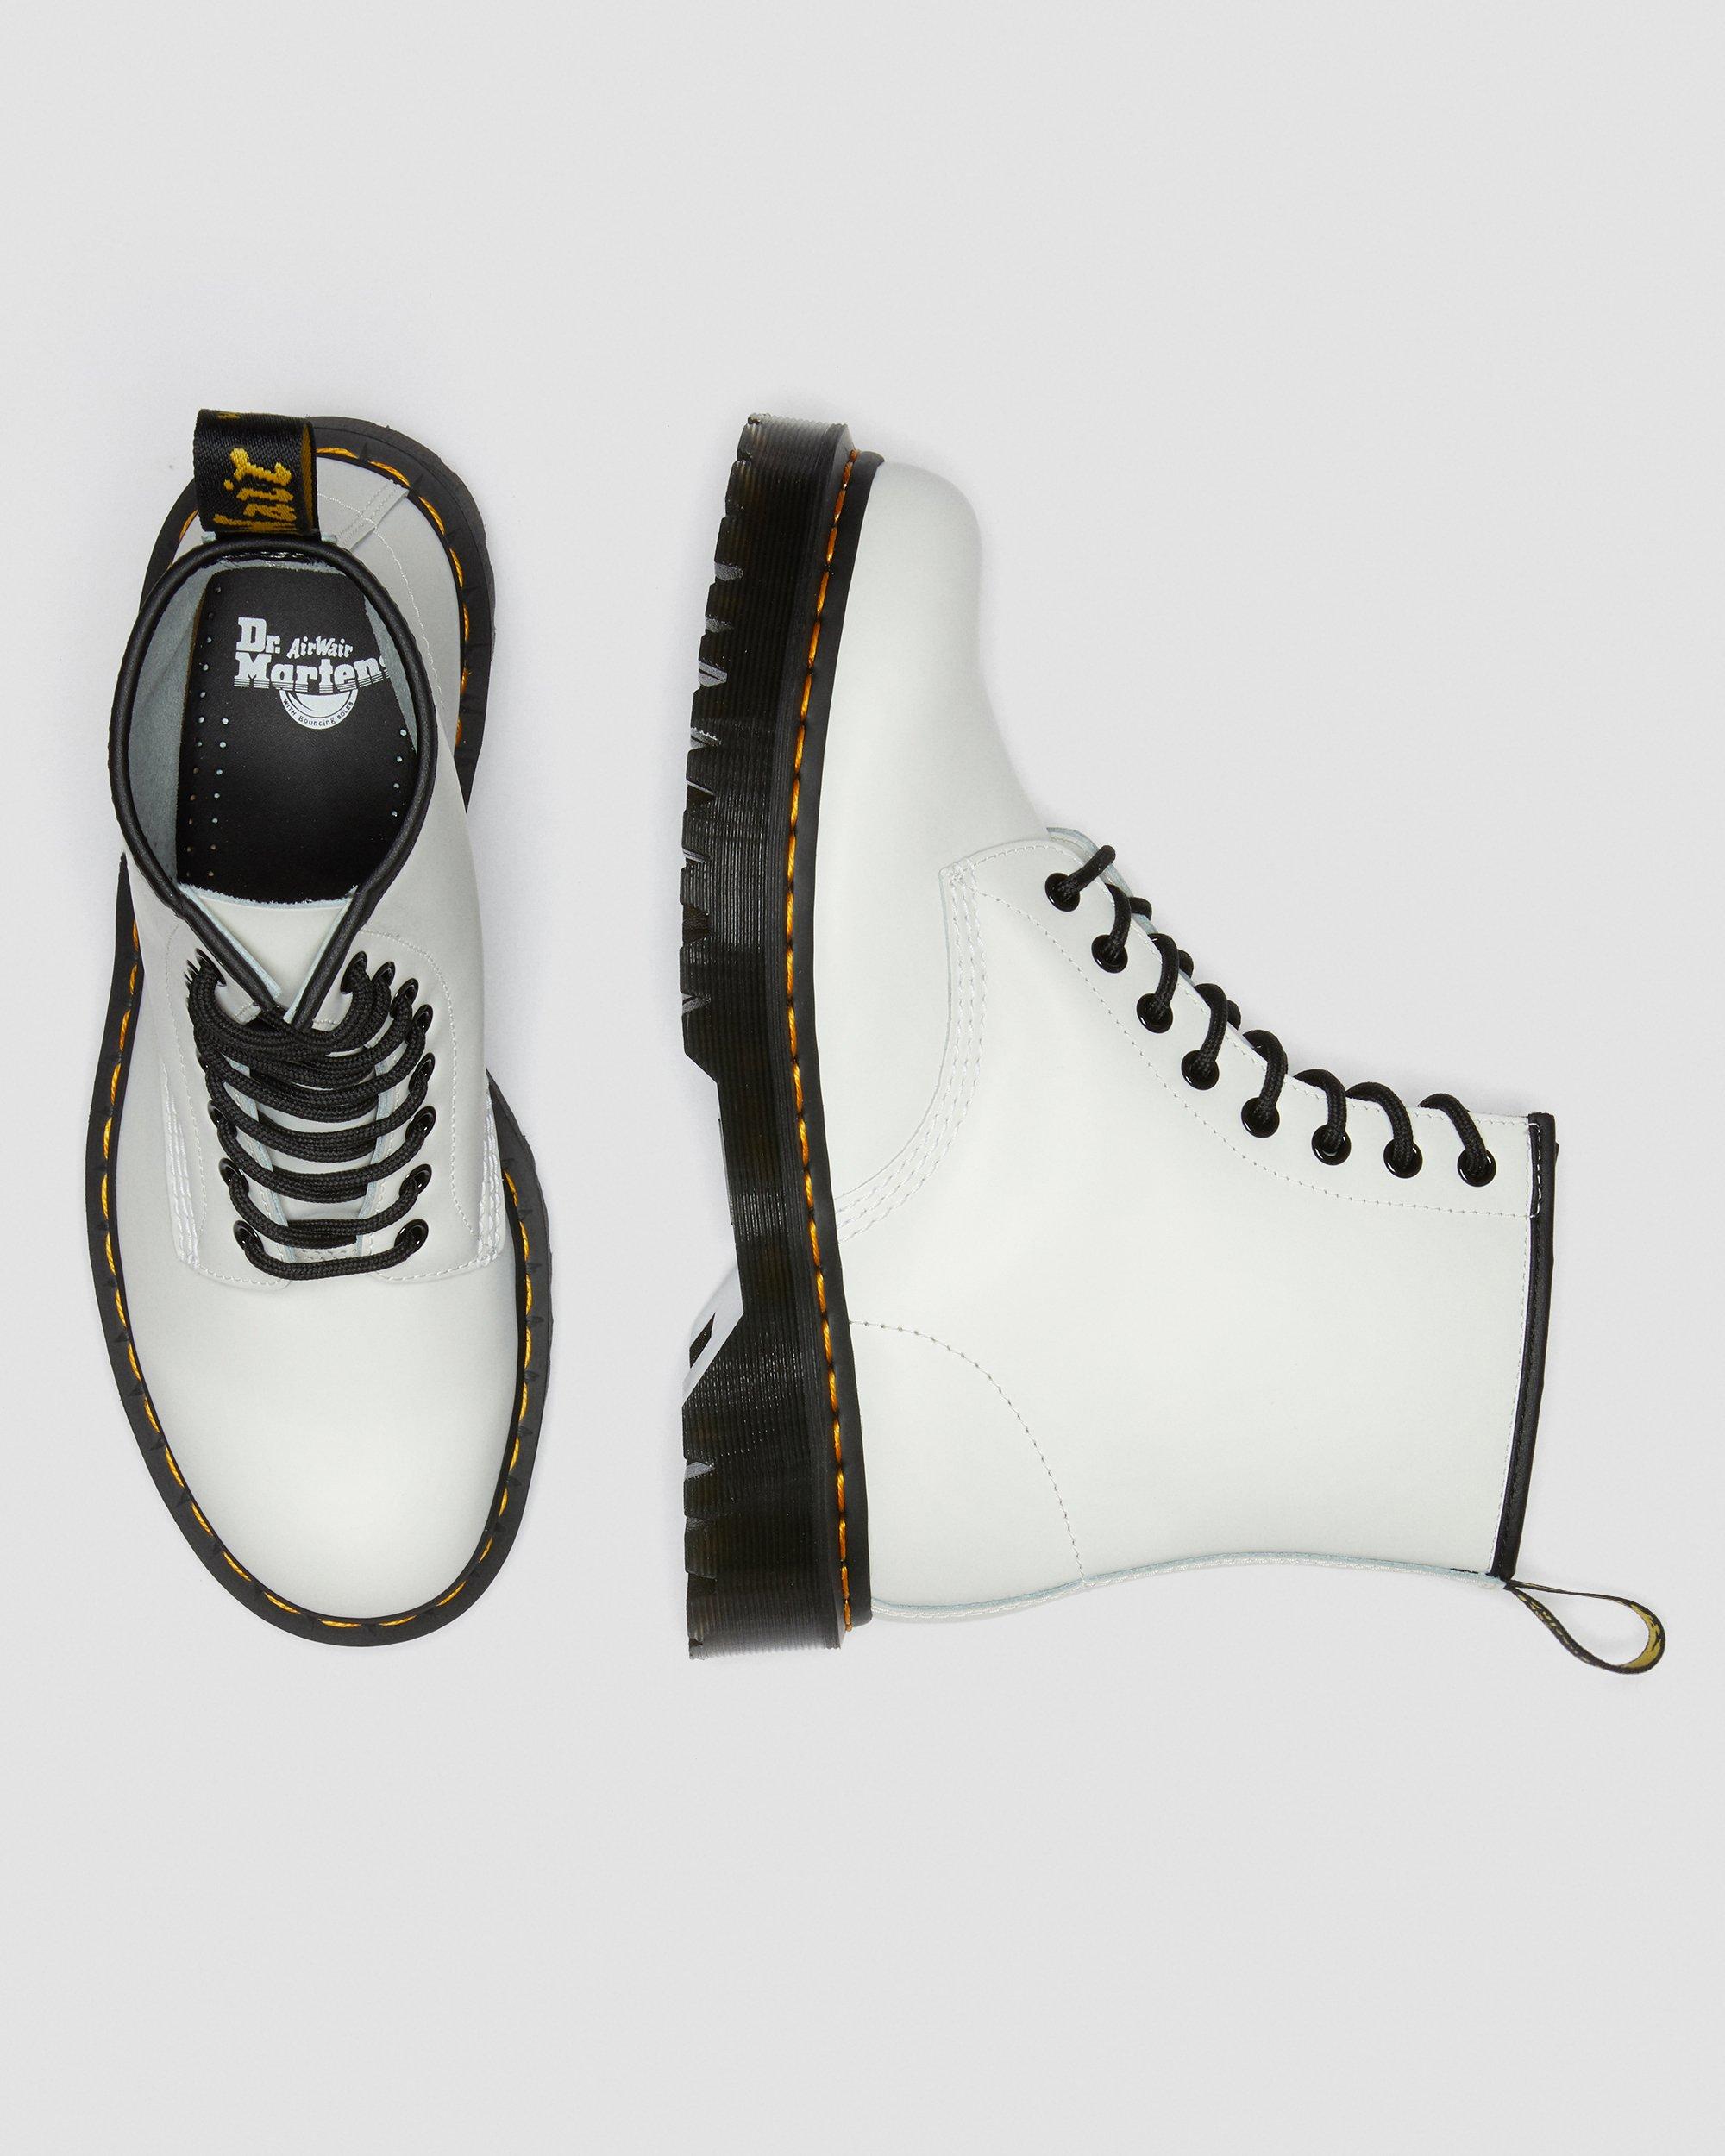 Dr. Martens 1460 Bex - White Boots - Genuine Leather Boots - Lulus